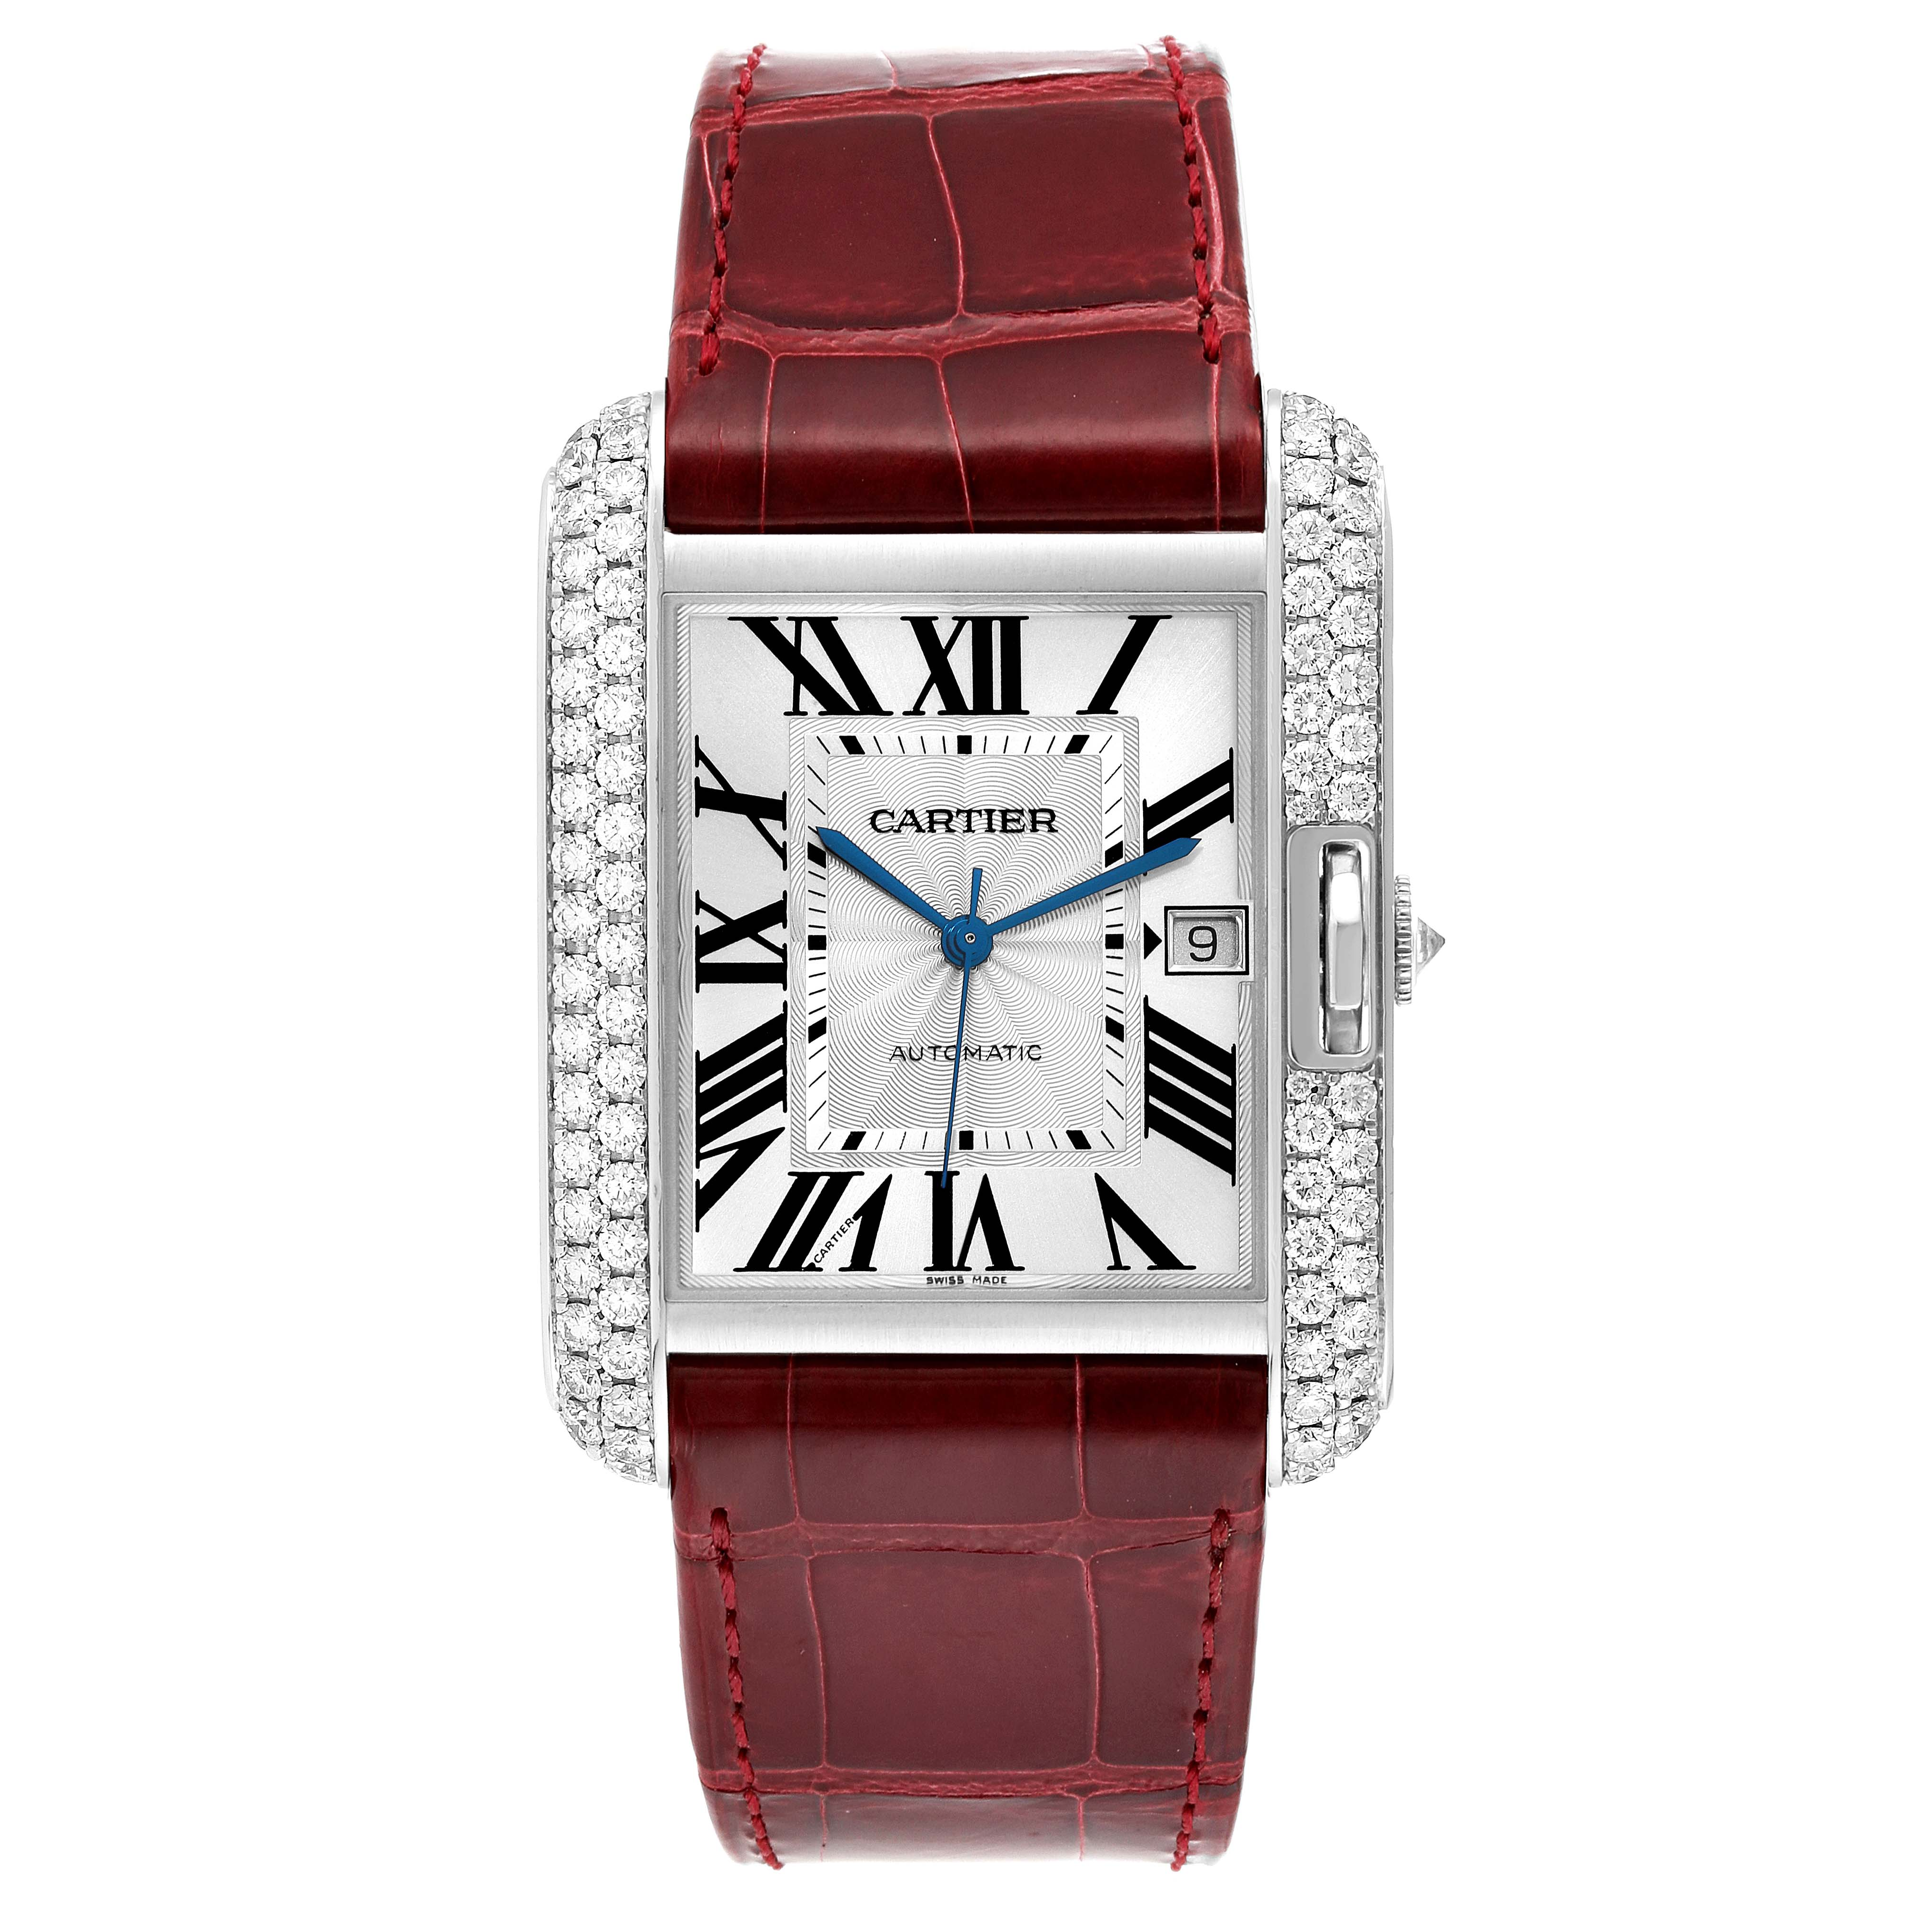 Cartier Tang Anglaise WT100008, 30x23mm, White Gold, Silver Dial